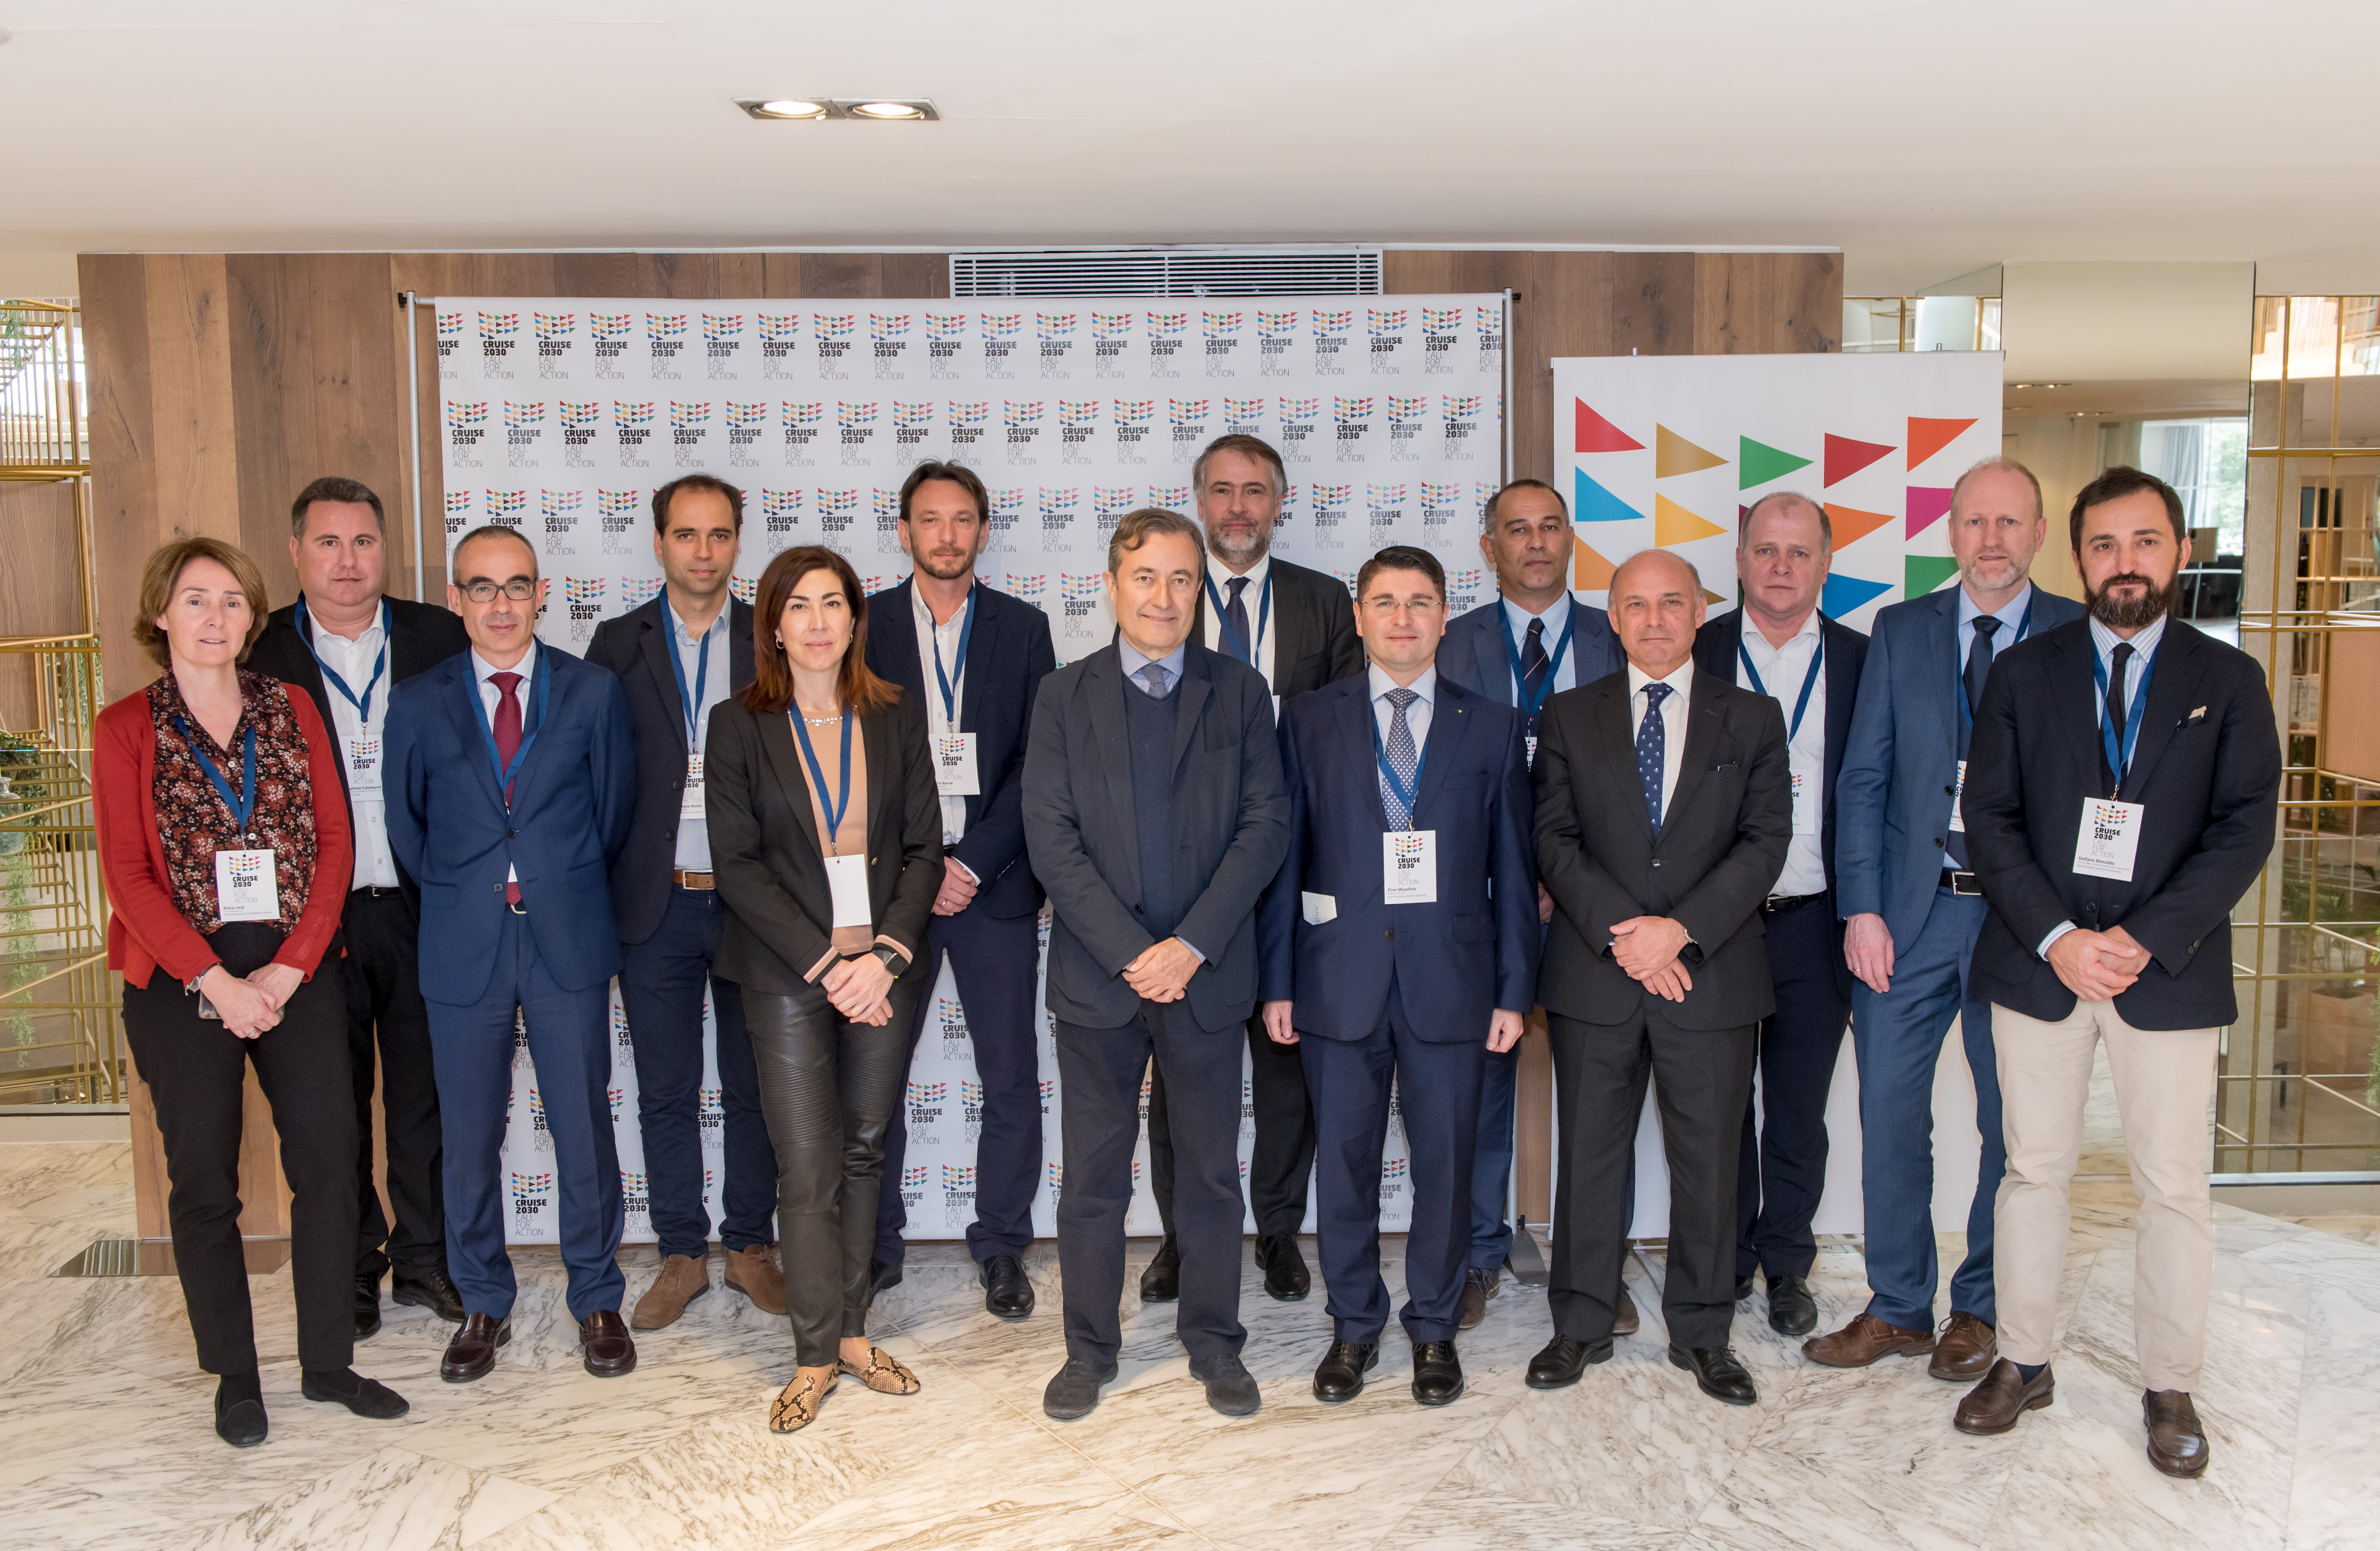 The Cruise 2030 Working Group commits to finding the best possible balance for ports, destinations, and cruise companies, to guarantee the future of the cruise industry in Europe. The next meeting will be held in Cannes in June 2020 